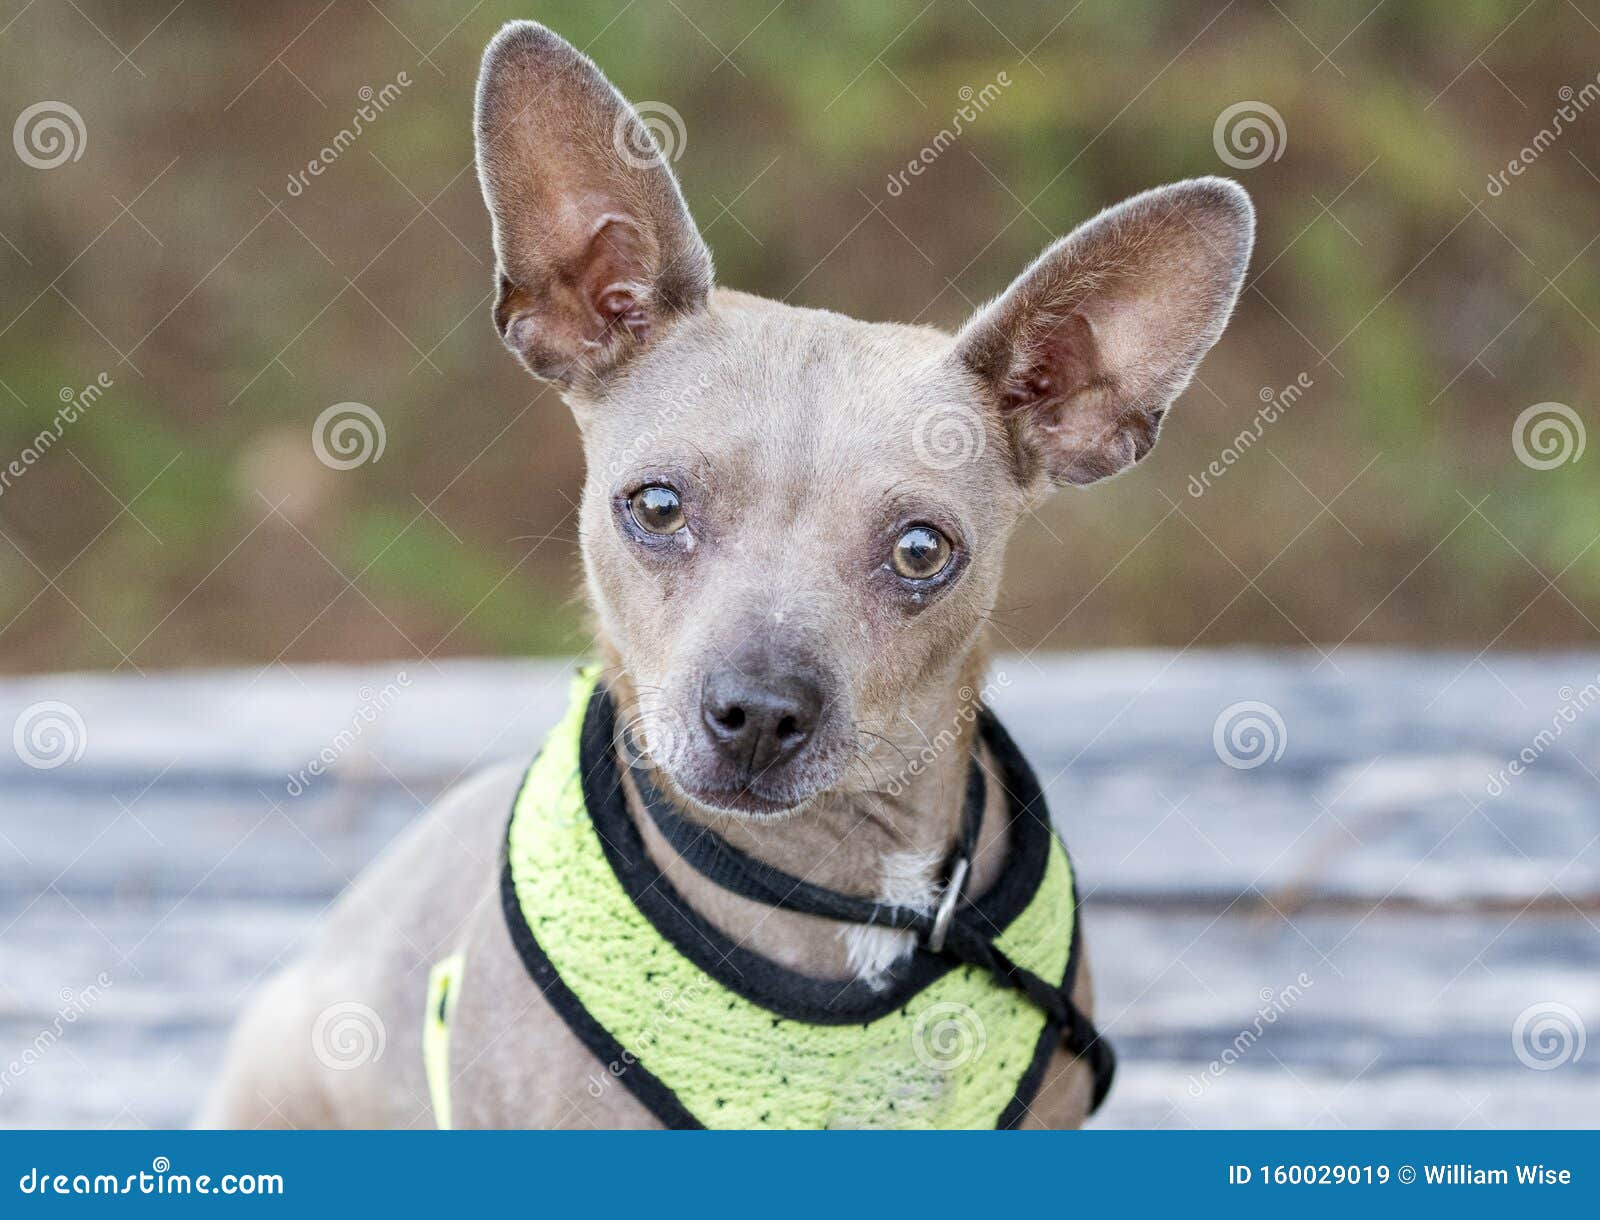 older chihuahua for adoption